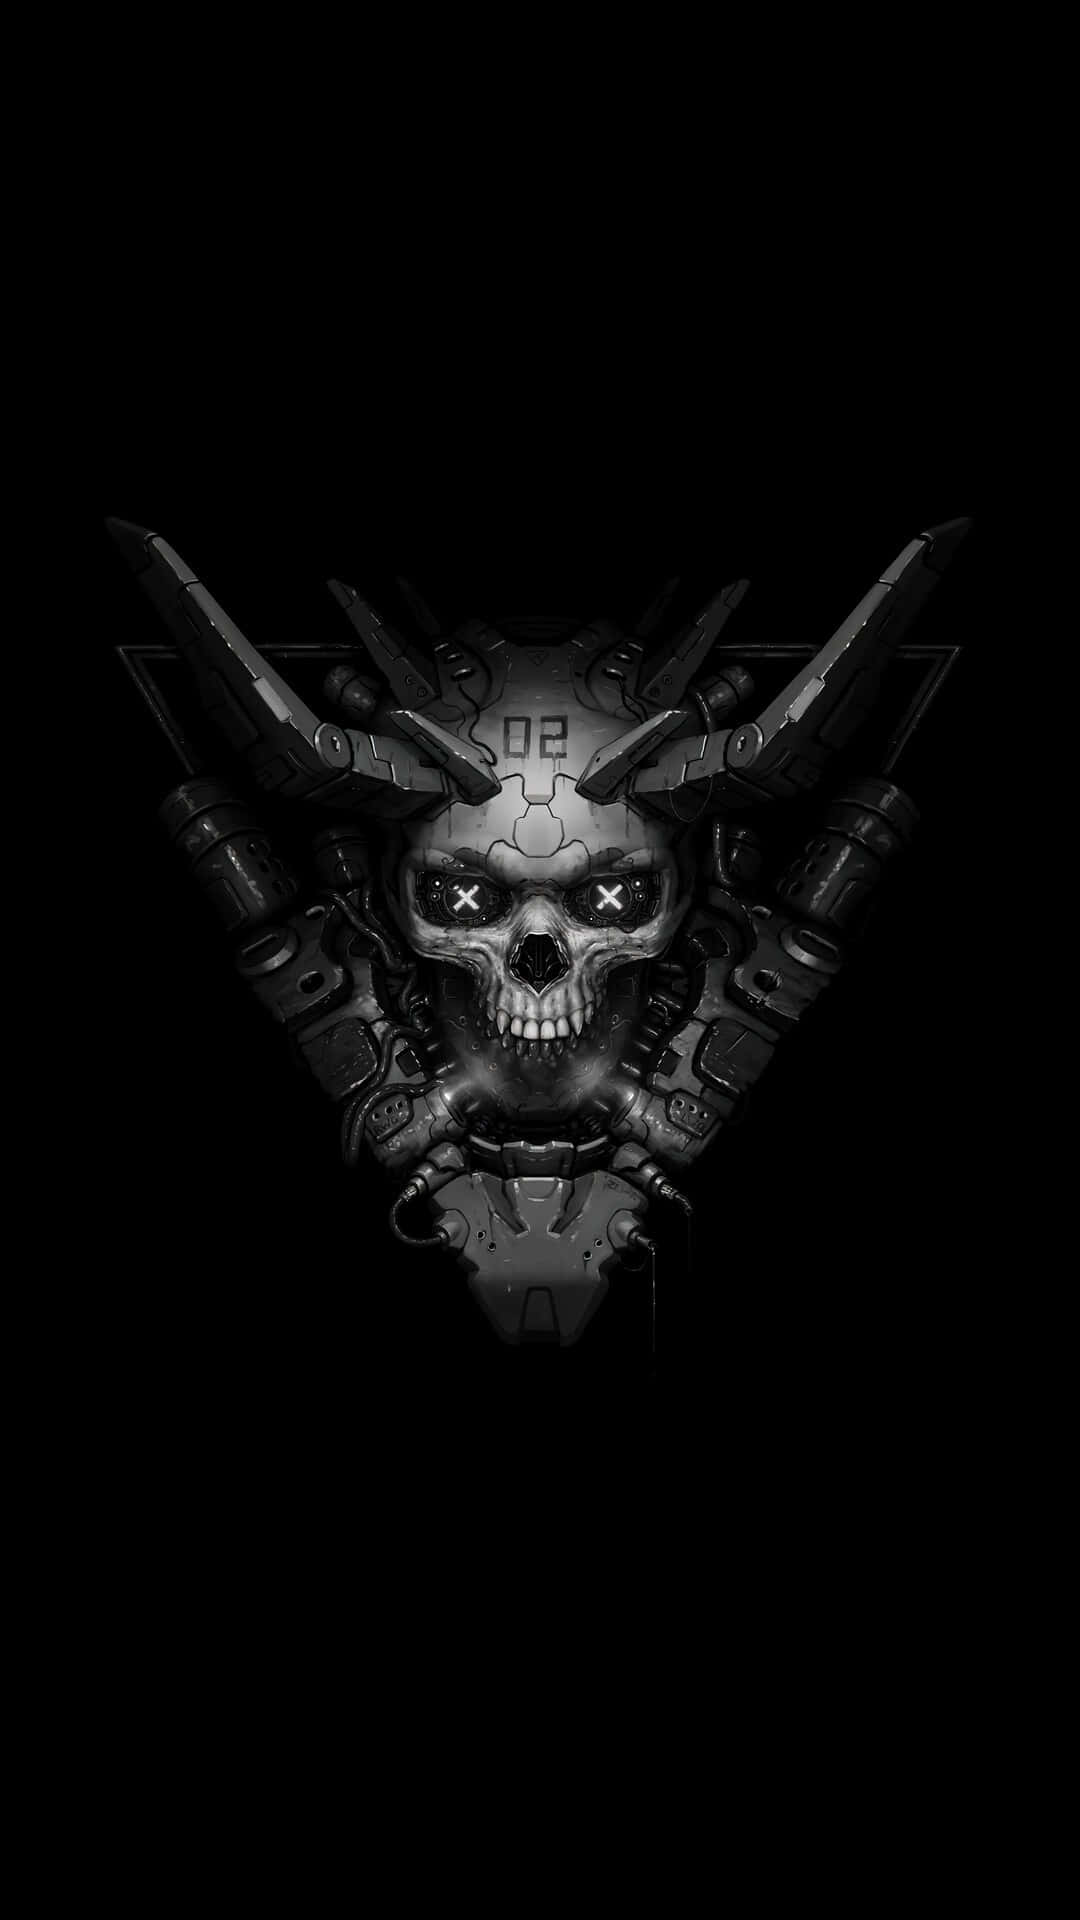 A Skull And Two Crossed Bones Against A Black Background